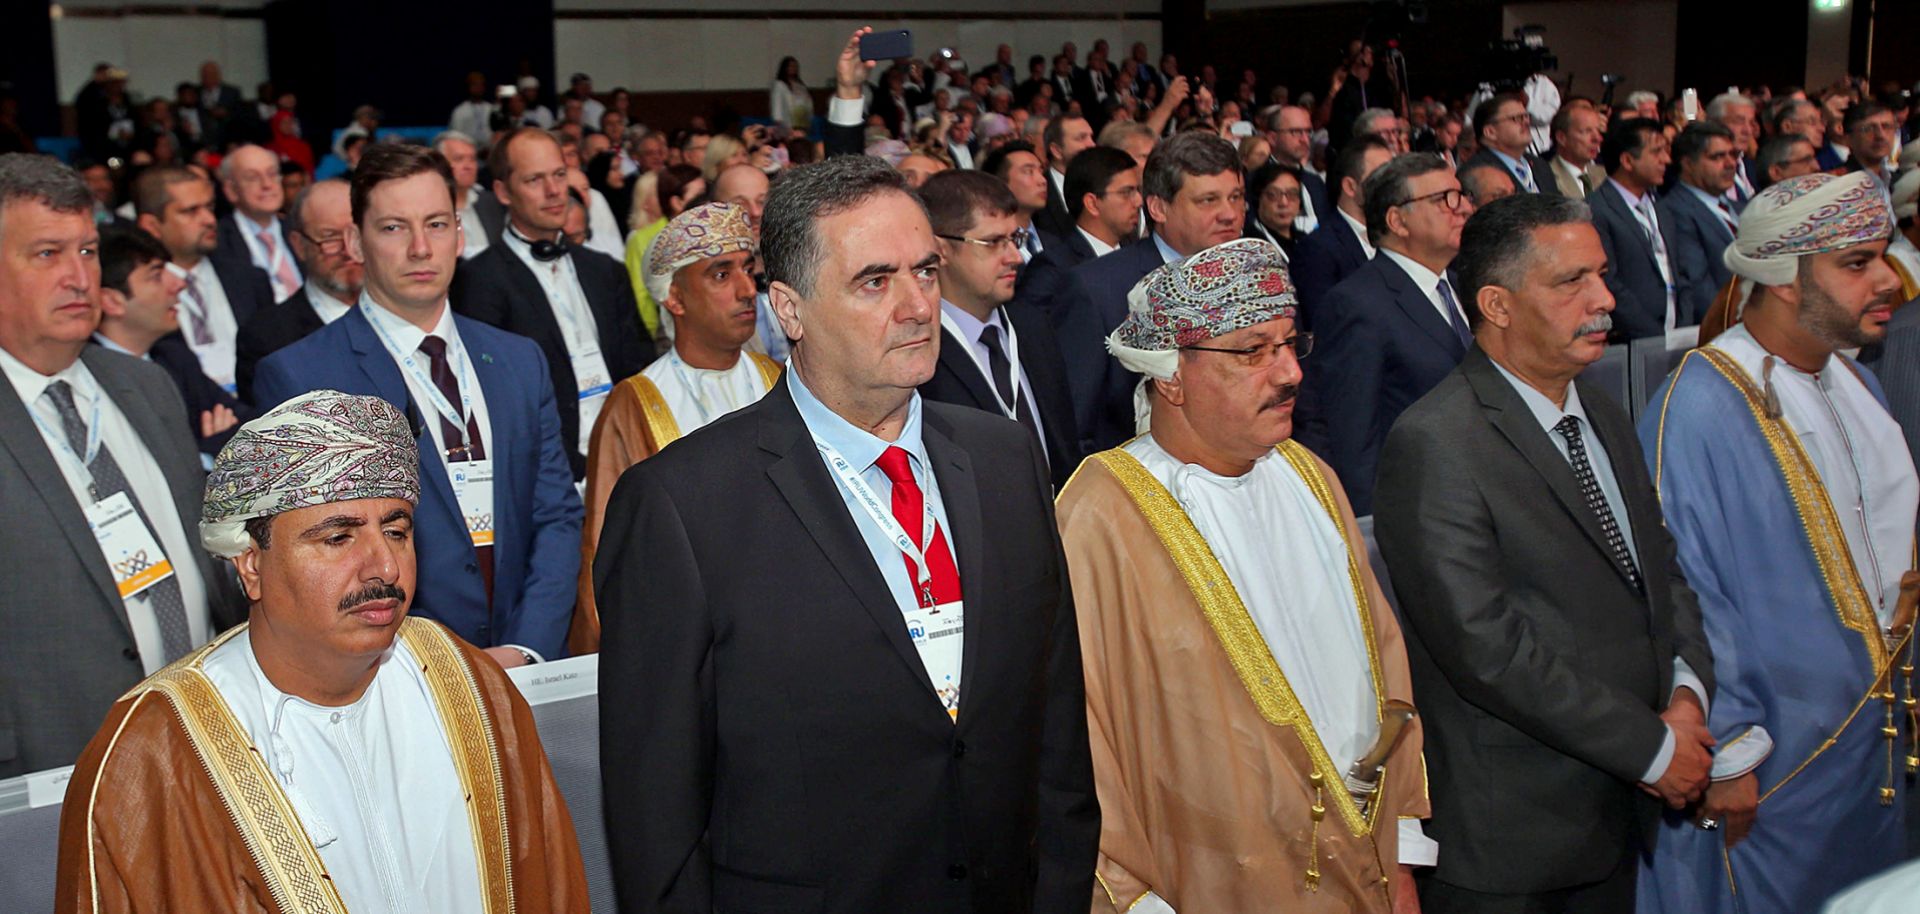 Israeli Transportation Minister Yisrael Katz, second from left, stands during the opening ceremony of the IRU World Congress, a regional transportation conference, in Muscat, Oman, on Nov. 7, 2018.